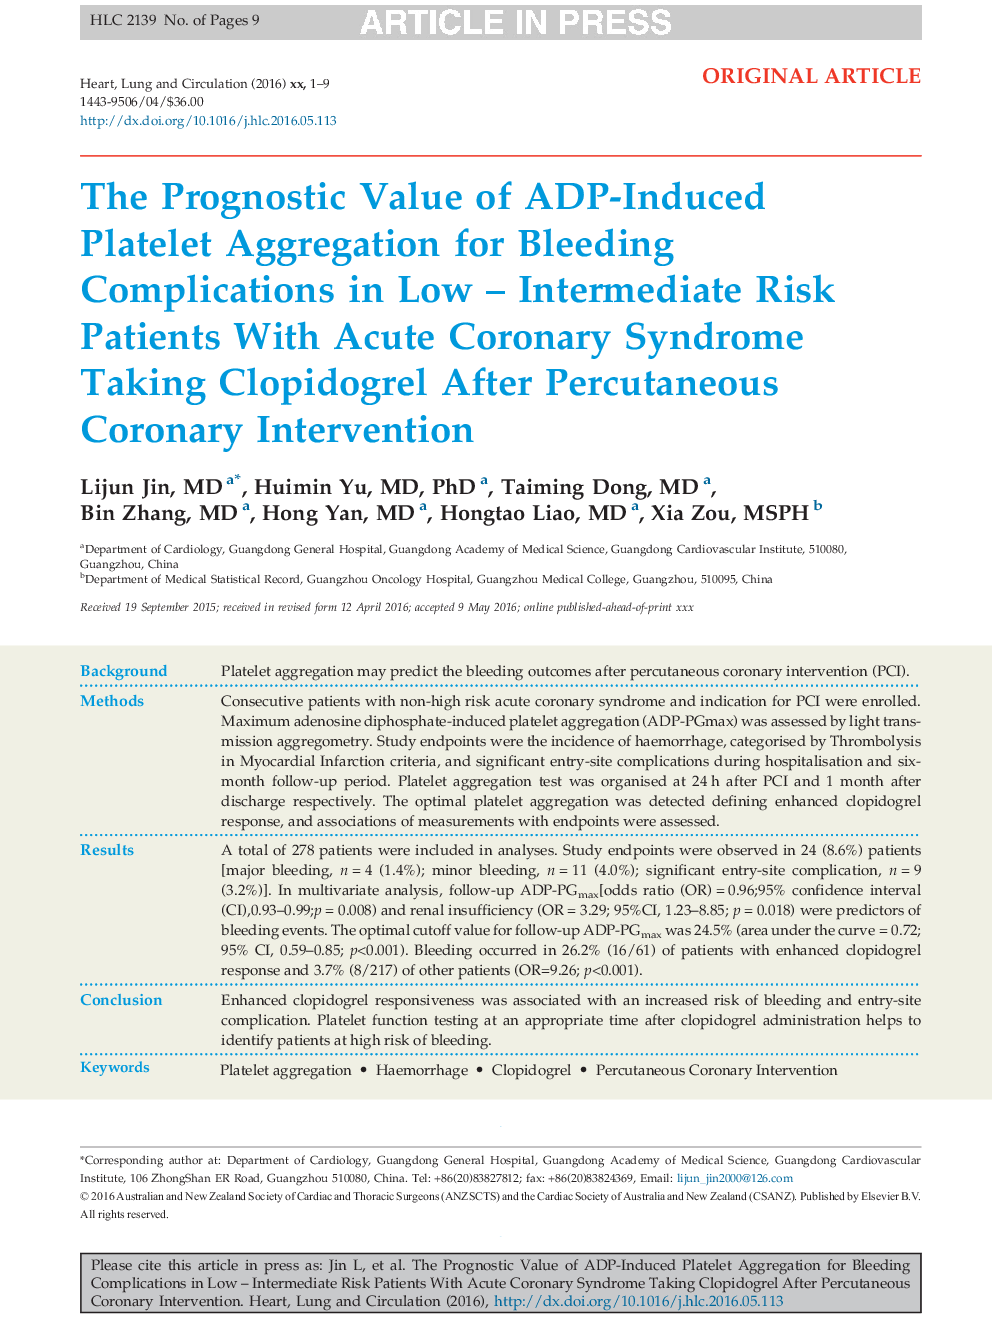 The Prognostic Value of ADP-Induced Platelet Aggregation for Bleeding Complications in Low - Intermediate Risk Patients with Acute Coronary Syndrome Taking Clopidogrel After Percutaneous Coronary Intervention